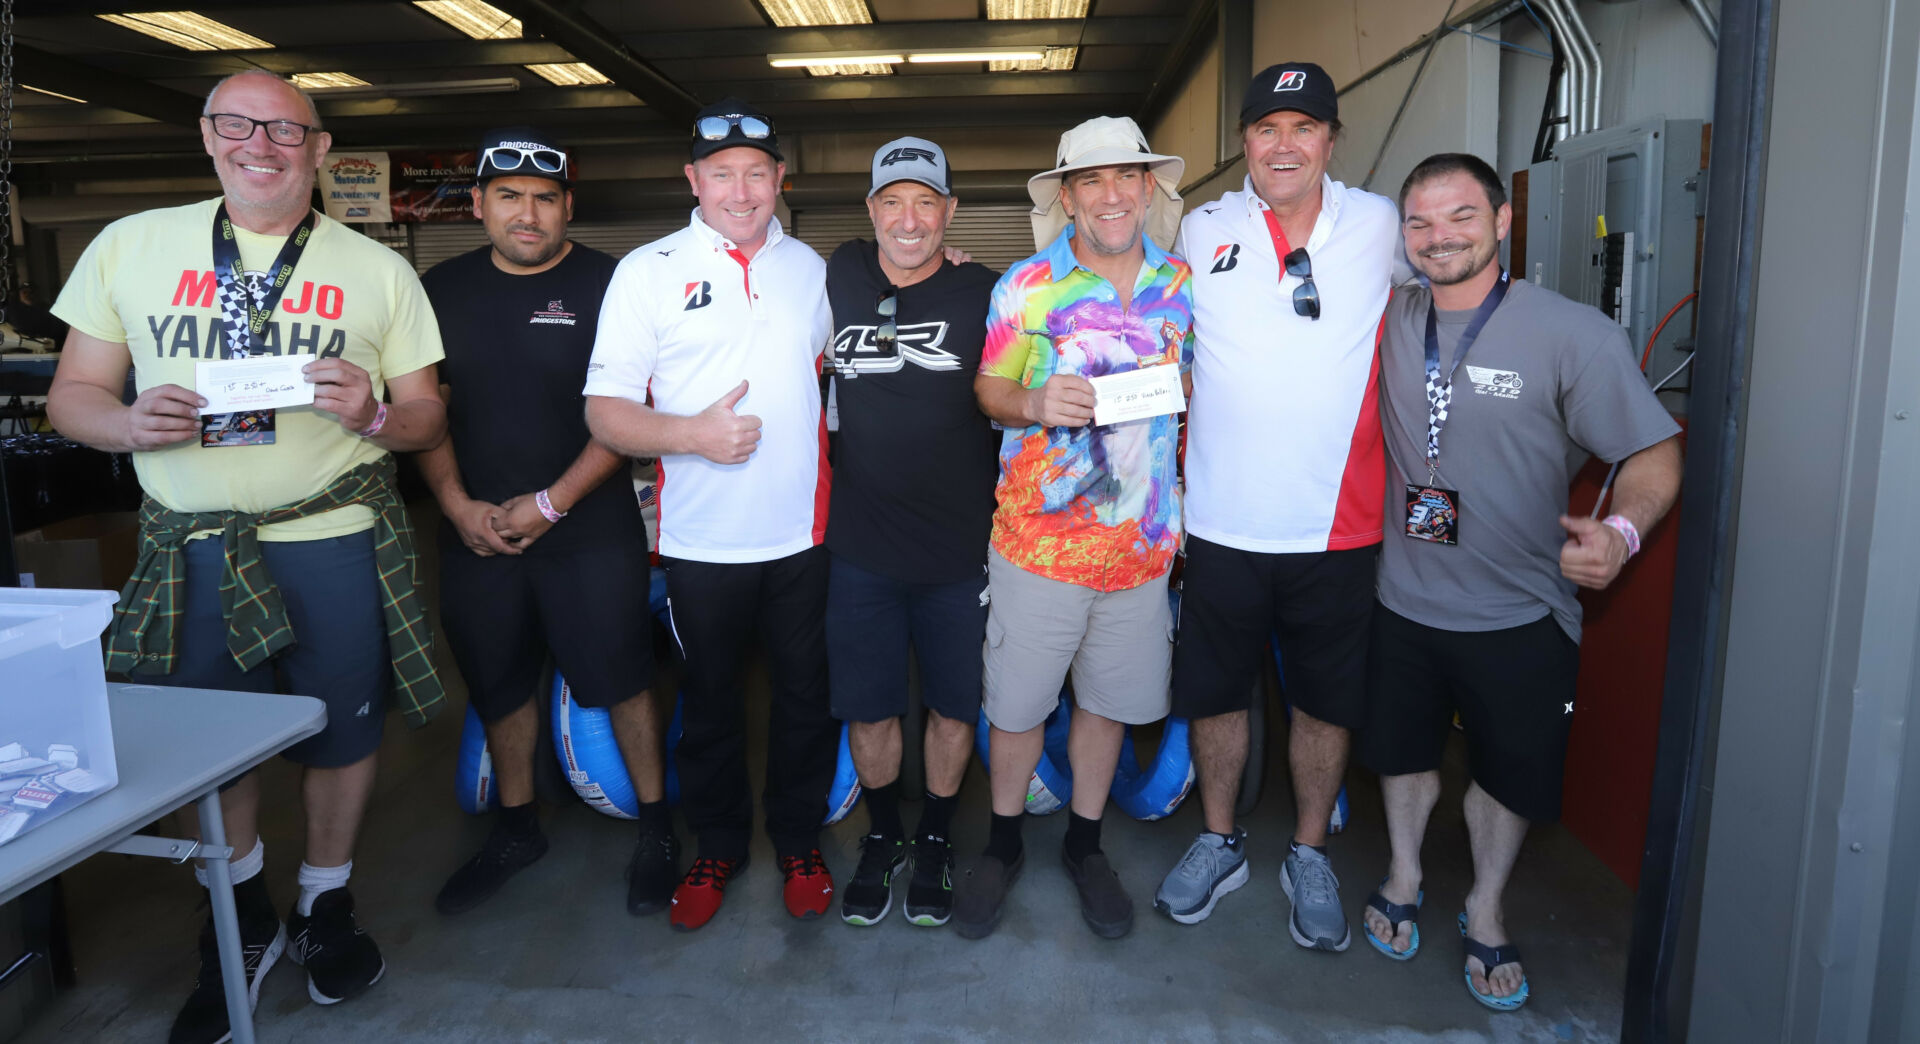 (From left): Dave Crussell (1st place 250+), Road Race City's Moises Figueroa-Perez, Bridgestone Motorcycle Tires Product Specialist Rory O’Neill, Sponsorship Organizer Ralph Staropoli, Vince Rolleri (1st place 250), Bridgestone Motorcycle Tires Road Race Manager Warren Dunham, BJ Bohrer (1st place 125). Photo by etechphoto.com, courtesy AHRMA.